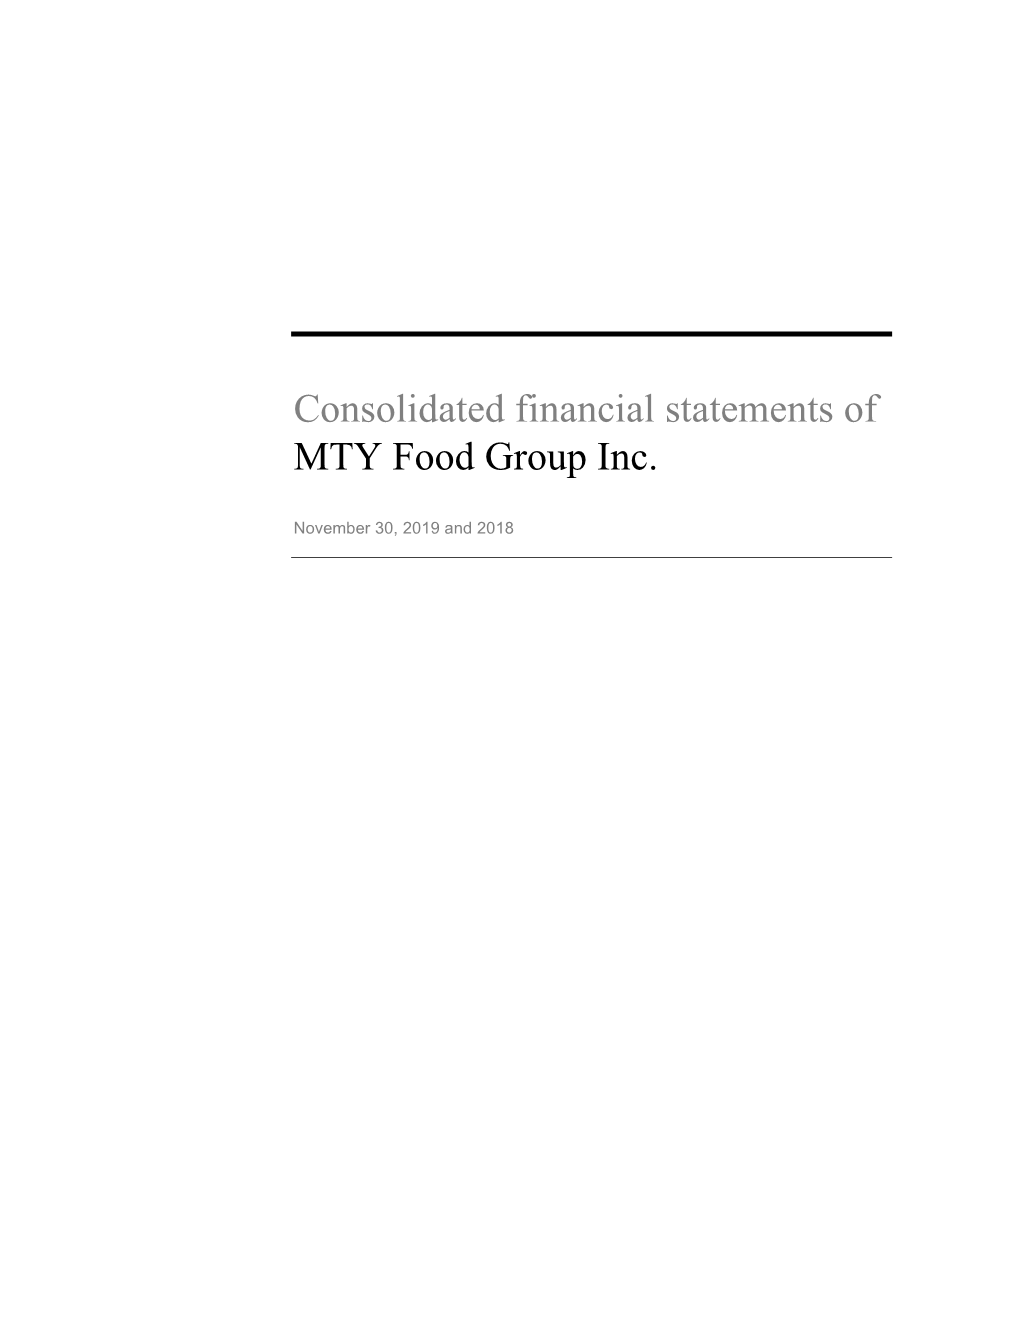 Consolidated Financial Statements of MTY Food Group Inc